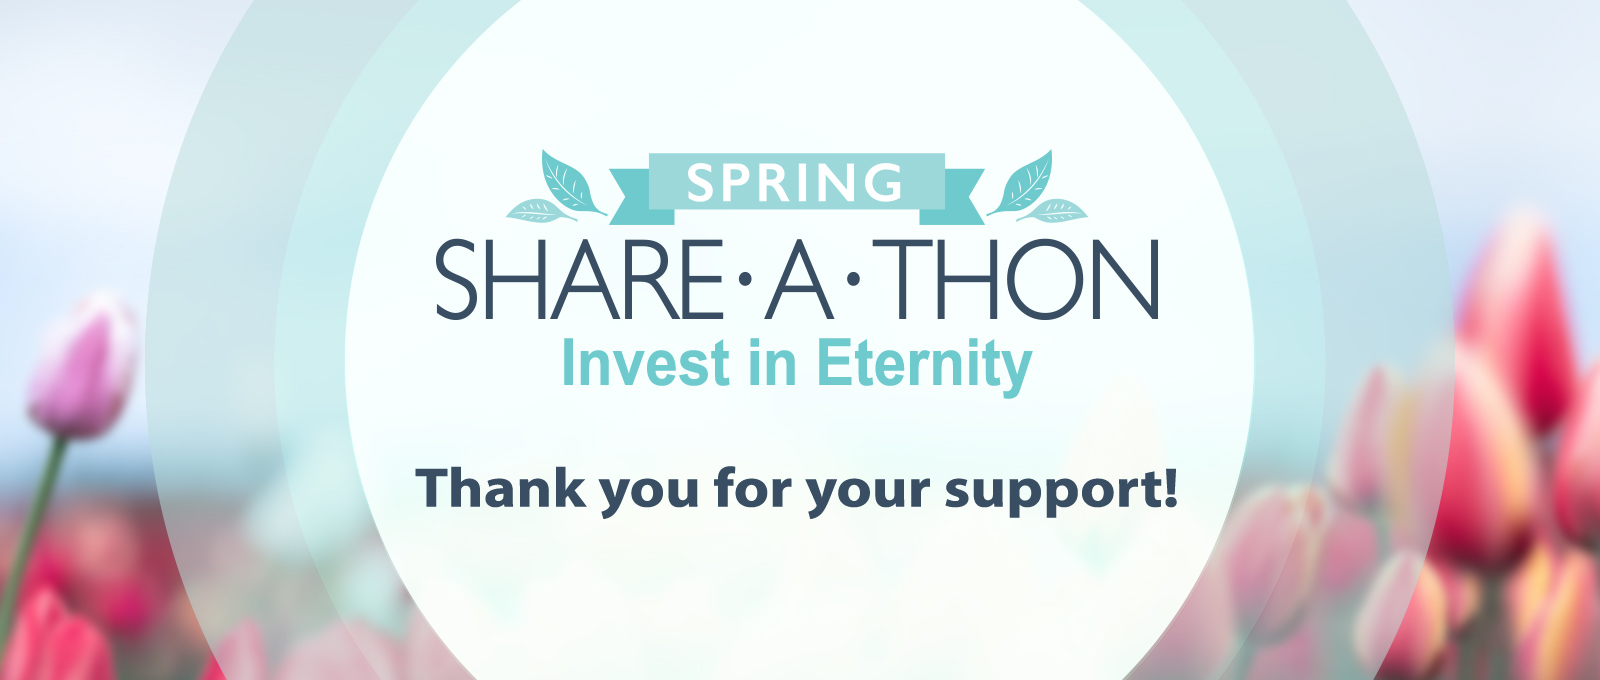 Spring Share-a-thon - Thank You